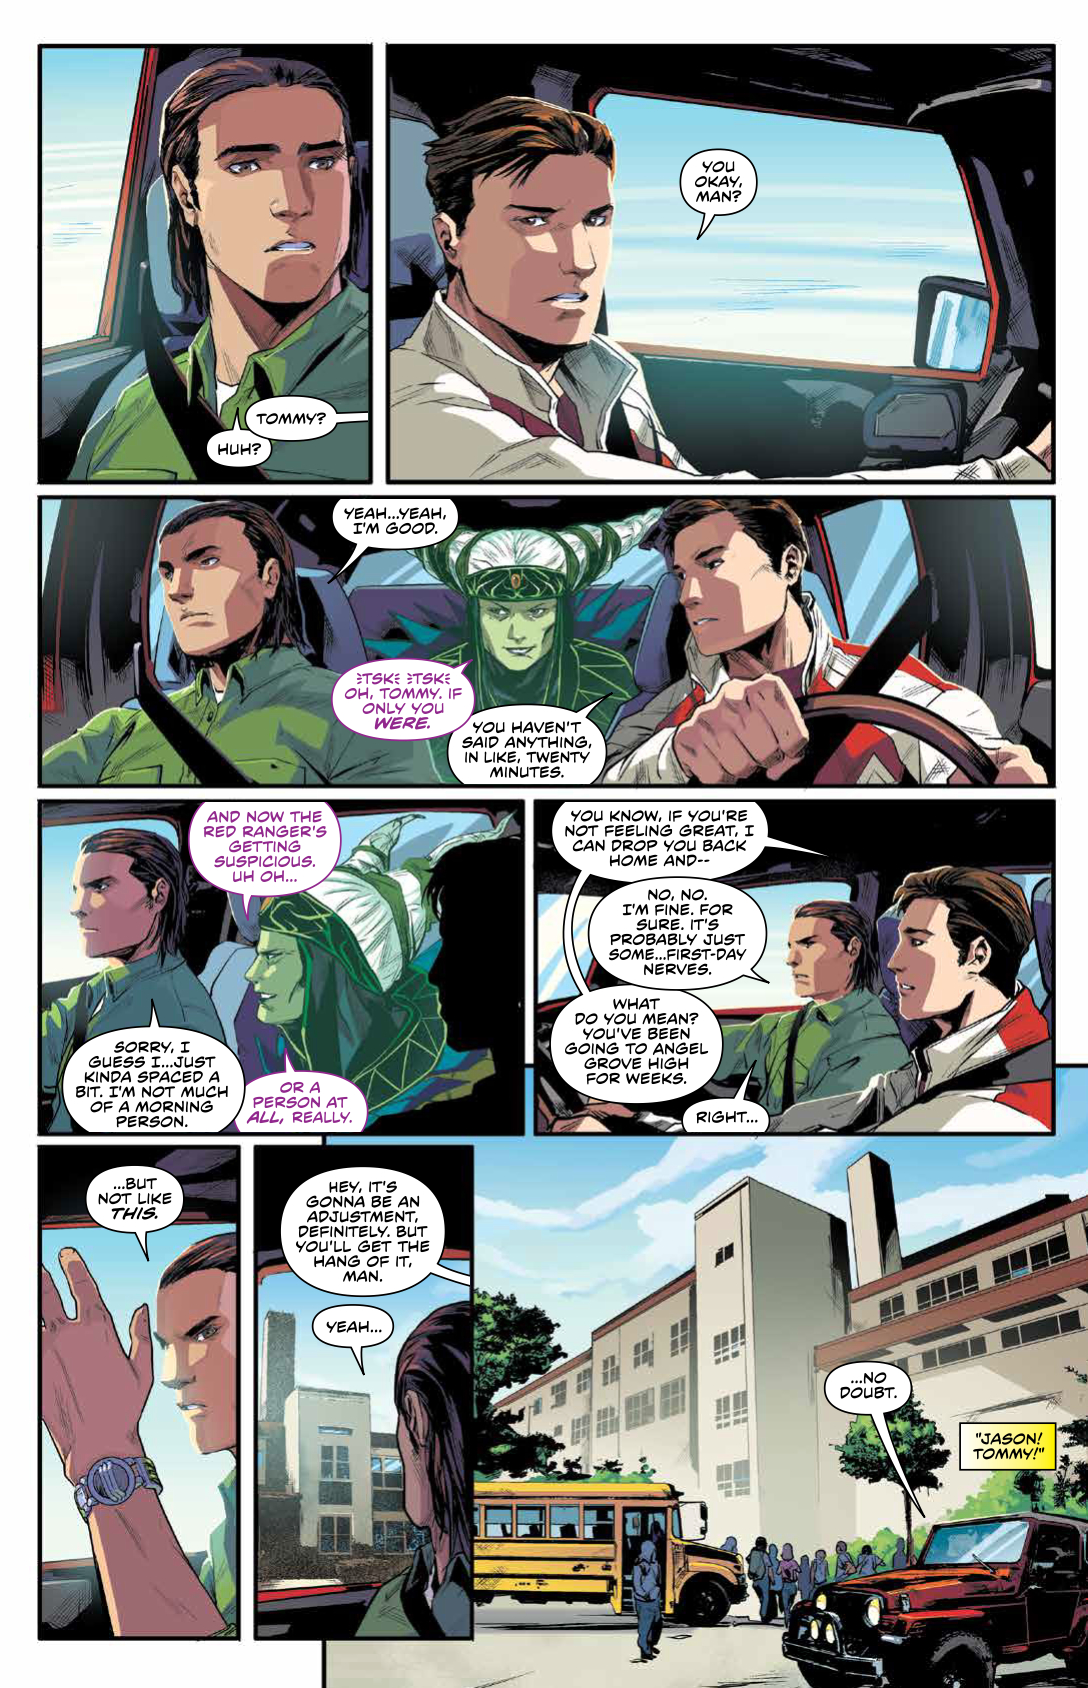 MMPR_Deluxe_Year1_HC_PRESS_12